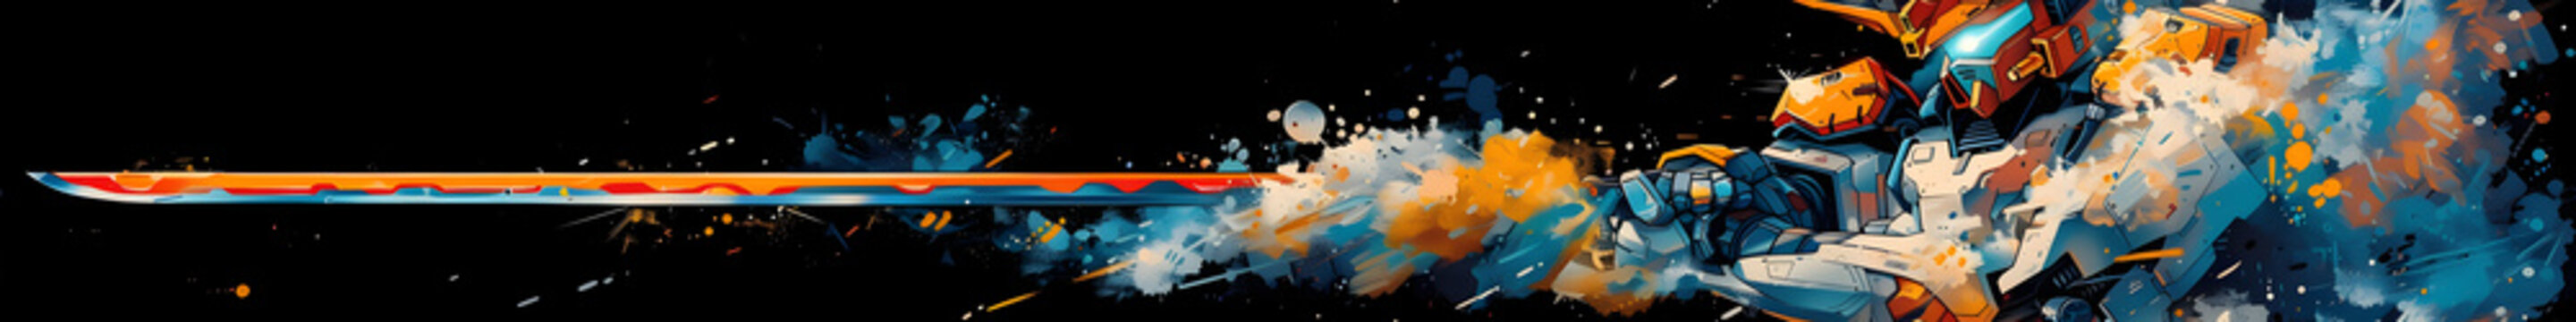 panorama of mech or robot samurai hand holding katana sword with dust splashes in vibrant colors on black background, for web banner with image ratio 8:1